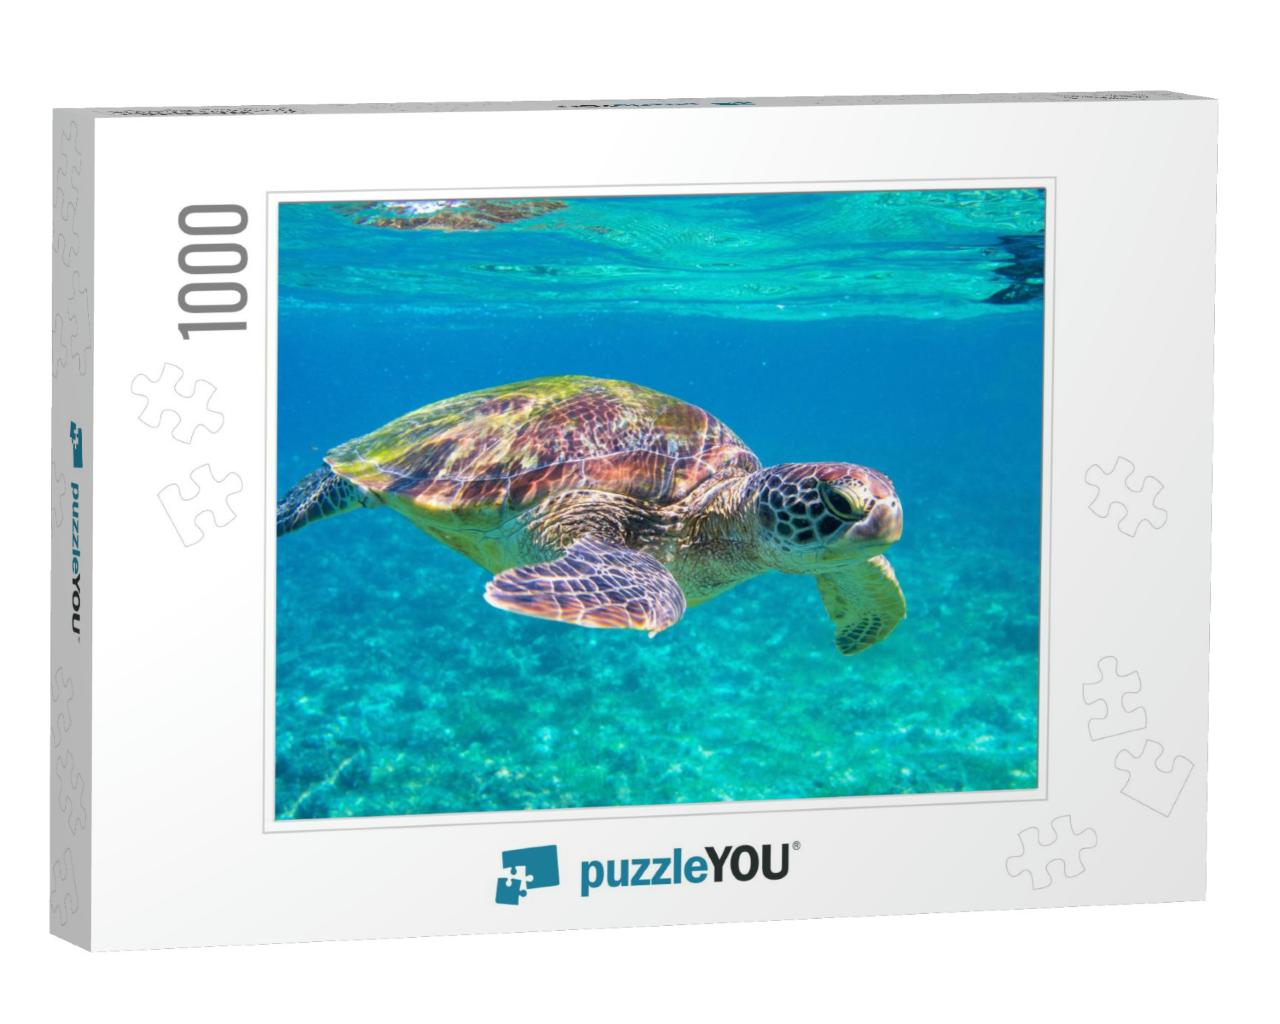 Cute Sea Turtle in Blue Water of Tropical Sea. Green Turt... Jigsaw Puzzle with 1000 pieces